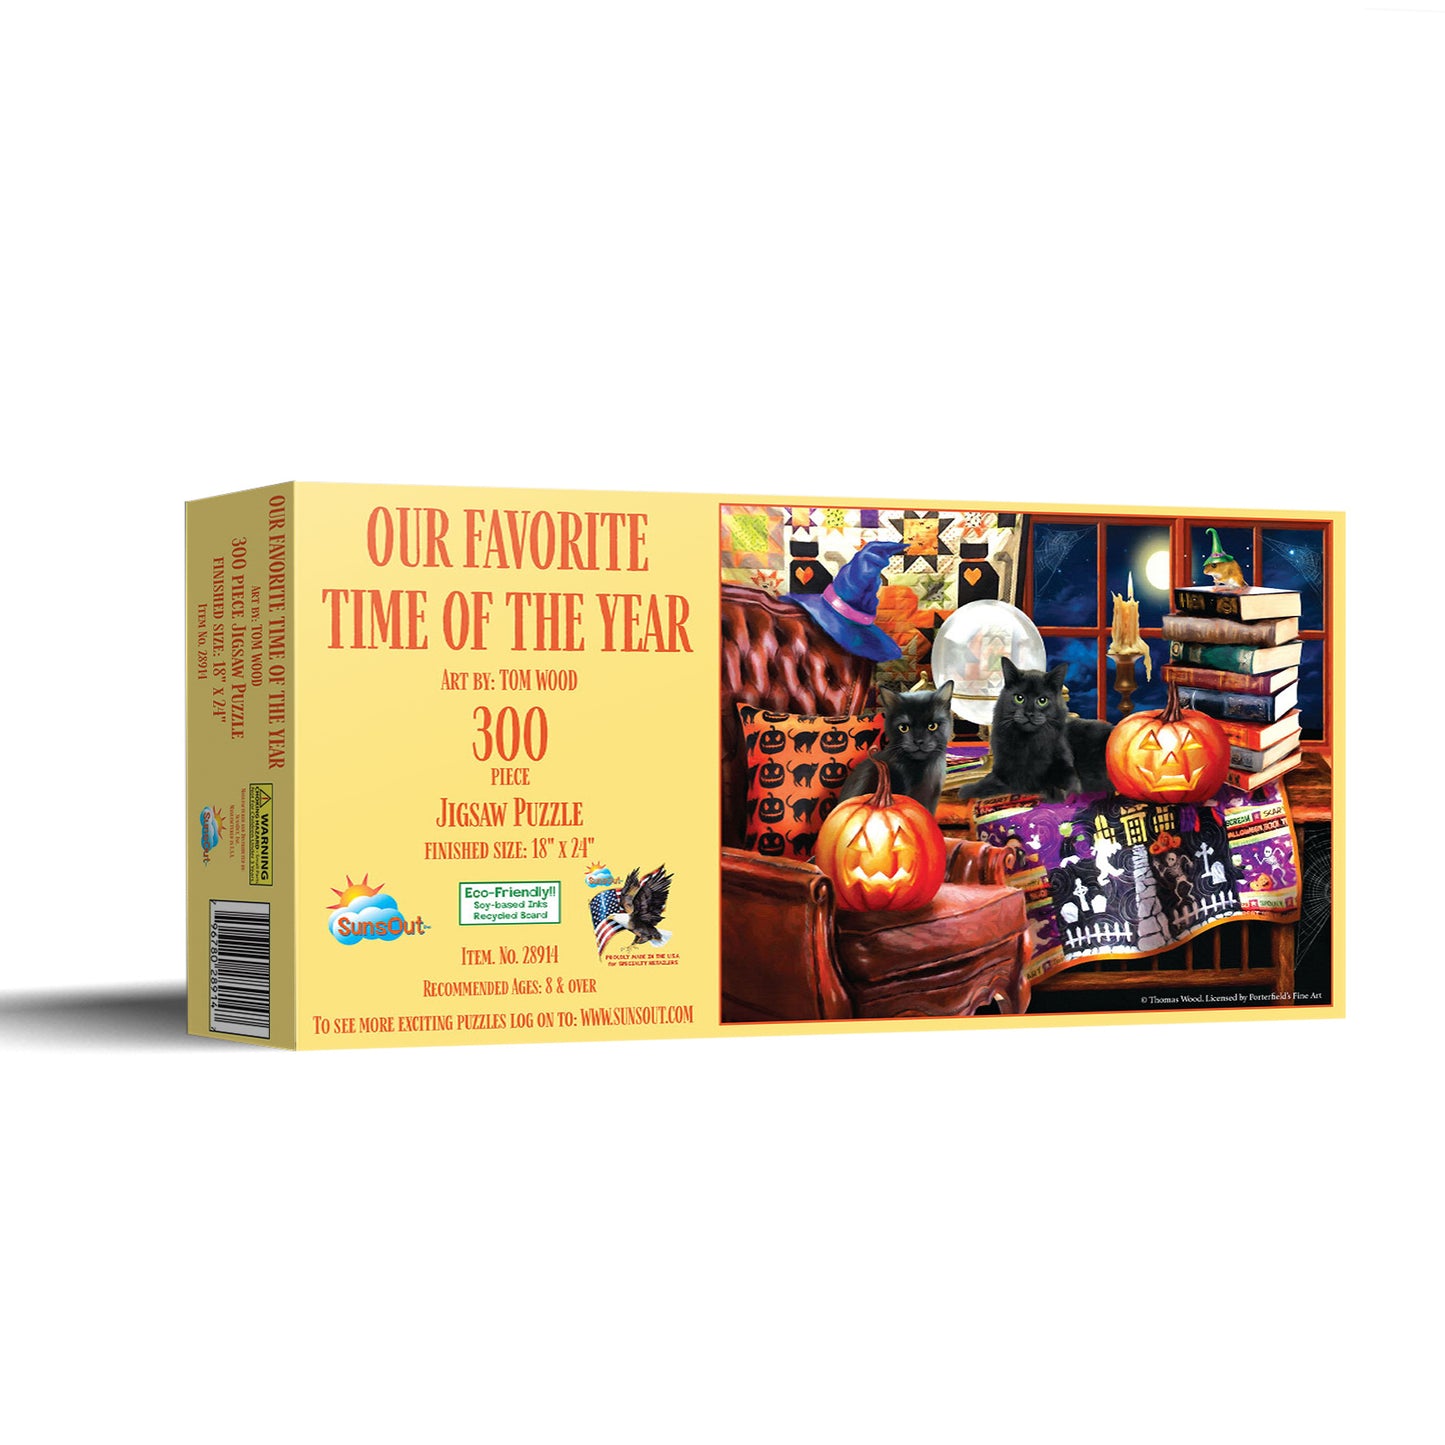 Our Favorite time of Year - 300 Piece Jigsaw Puzzle